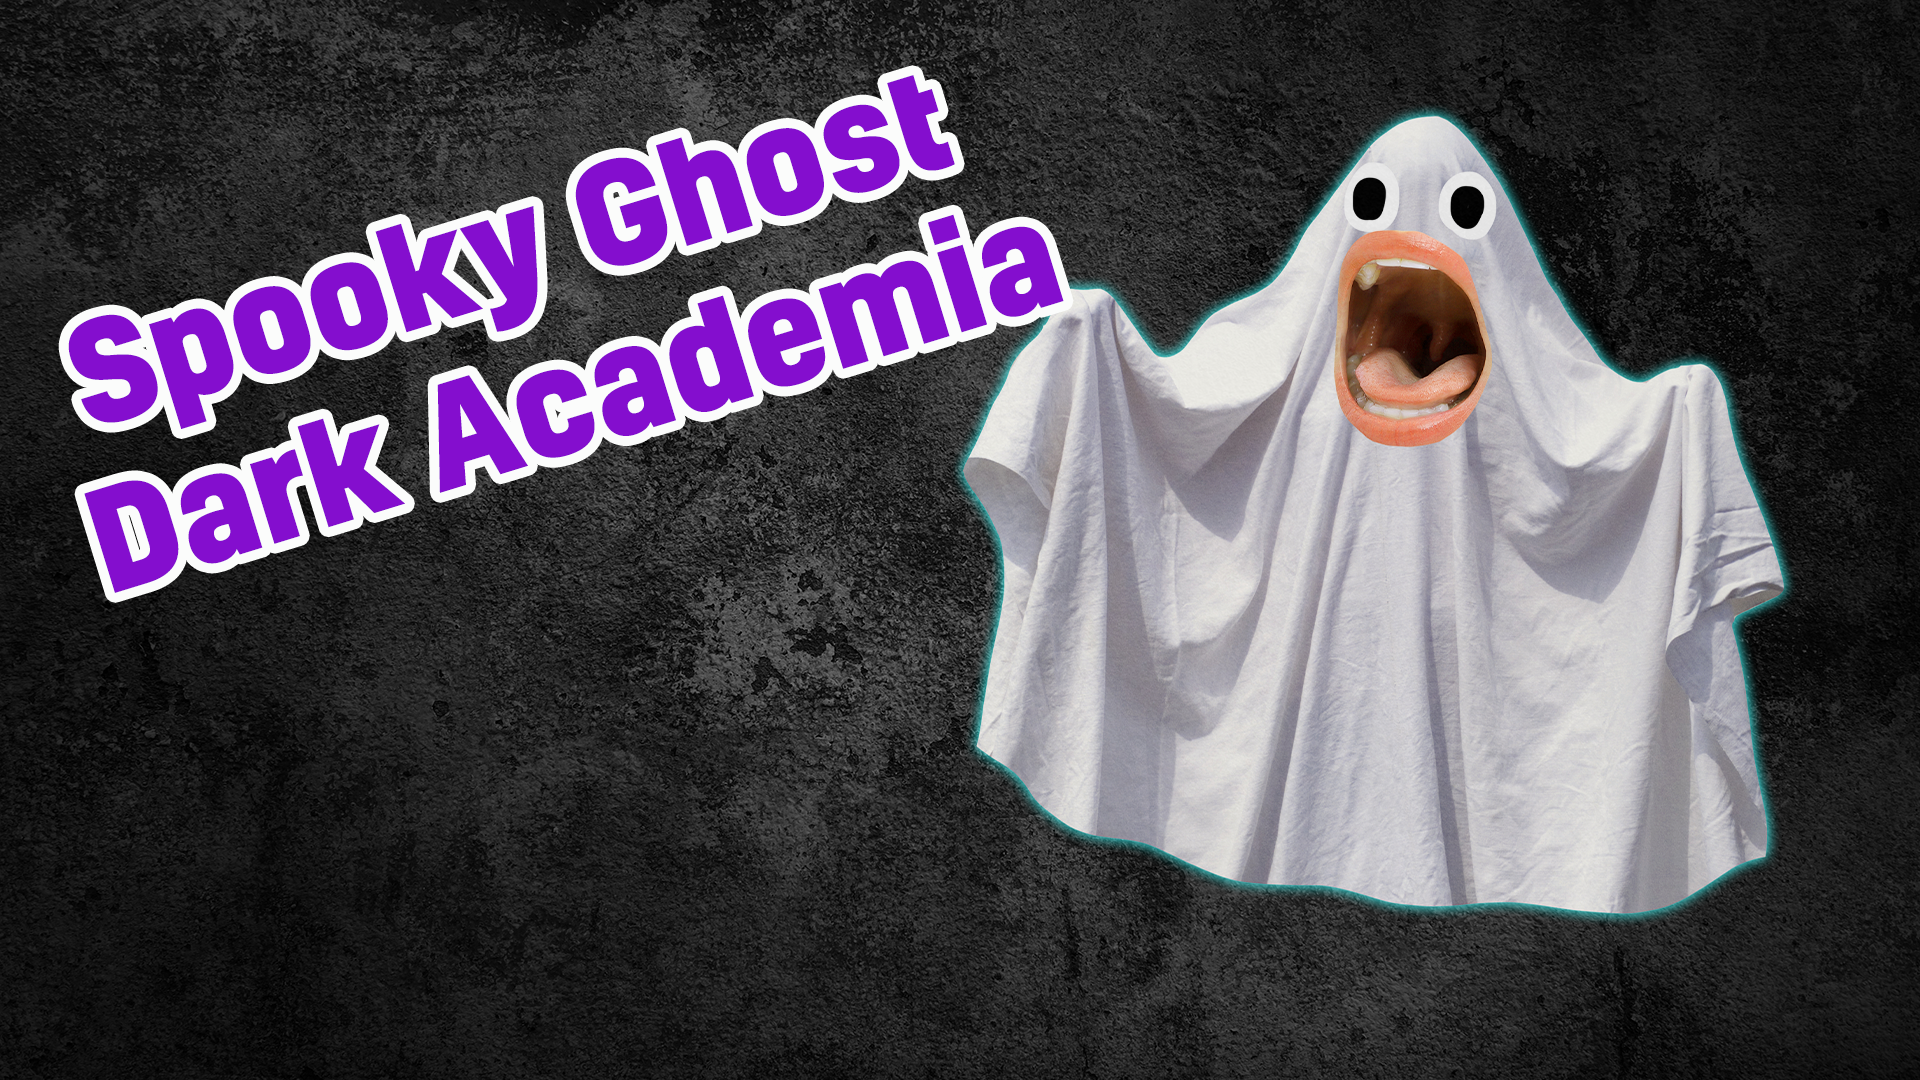 Your style is Spooky Ghost Dark Academia! You like wearing lots of white and walking eerily down corridors holding a candle! Anything lacy and romantic will suit you!